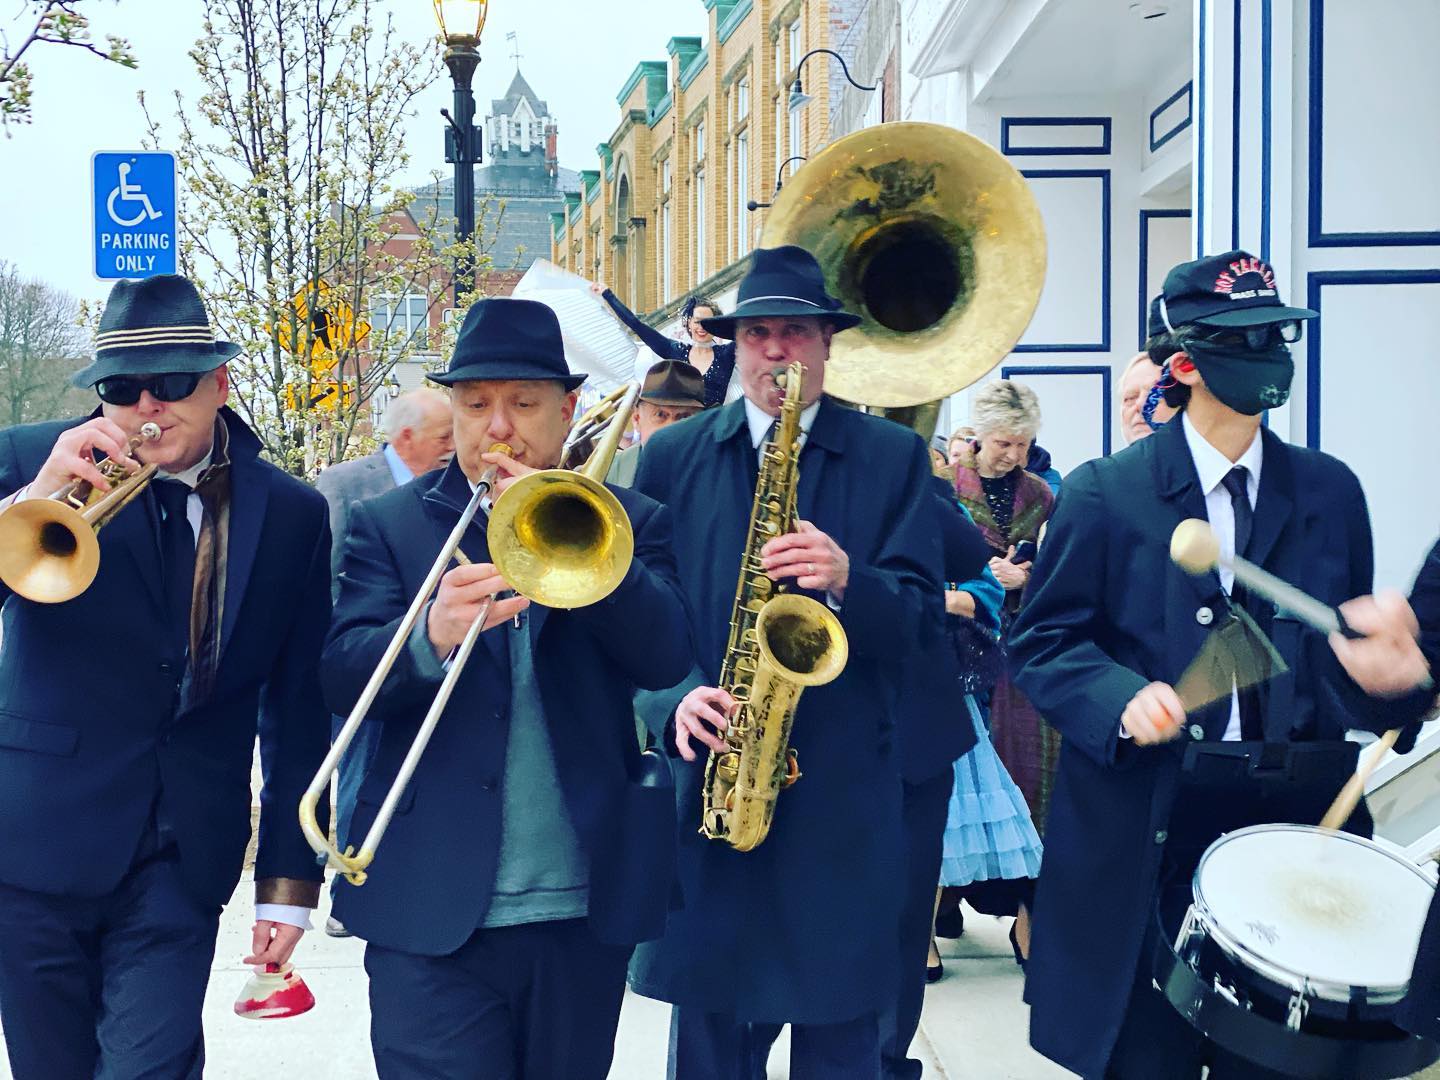 four men in black suits and black hats play musical instruments on the street